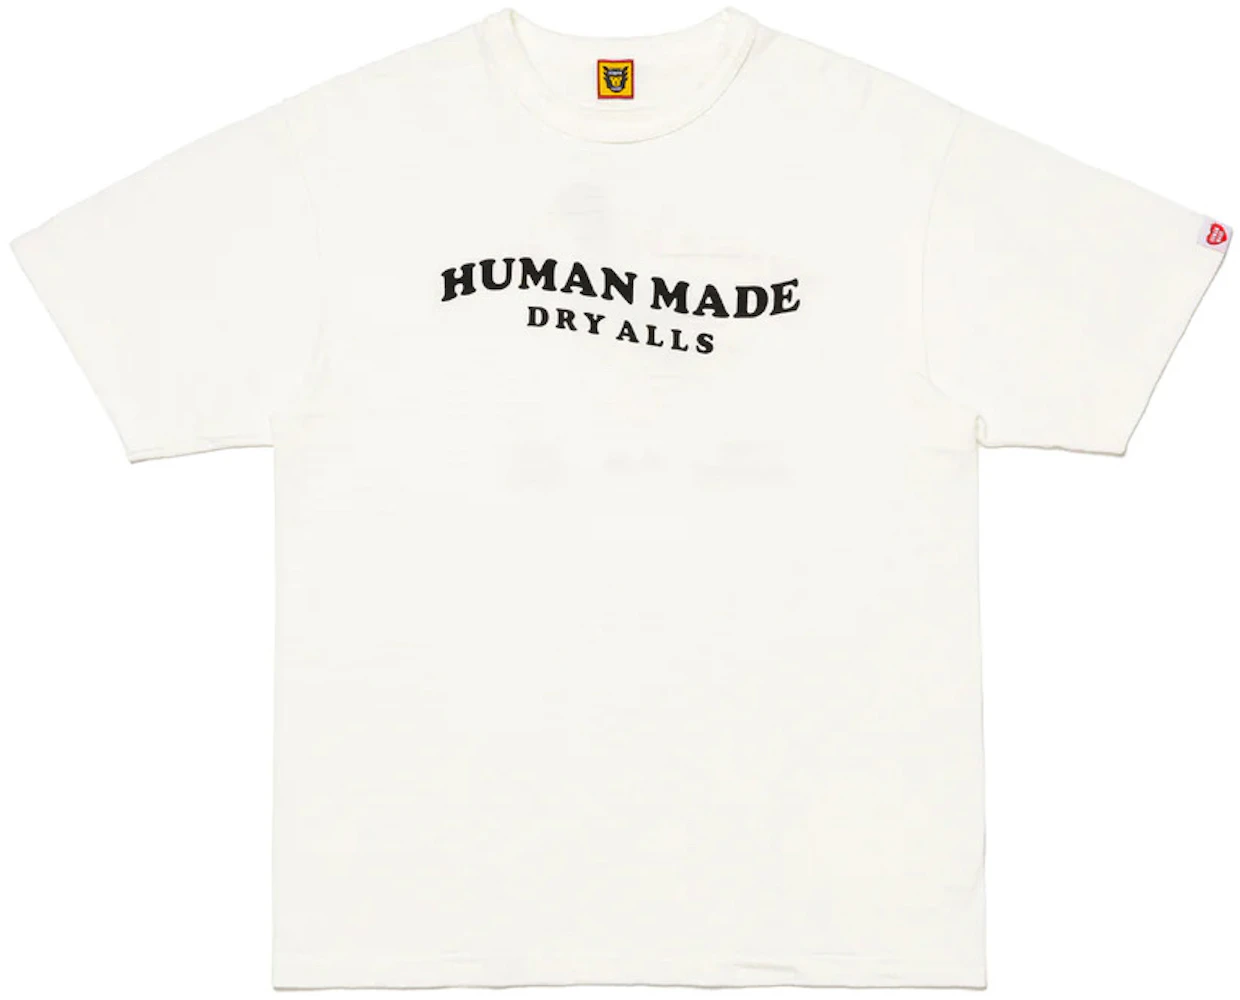 Human Made Graphic L/S T-Shirt